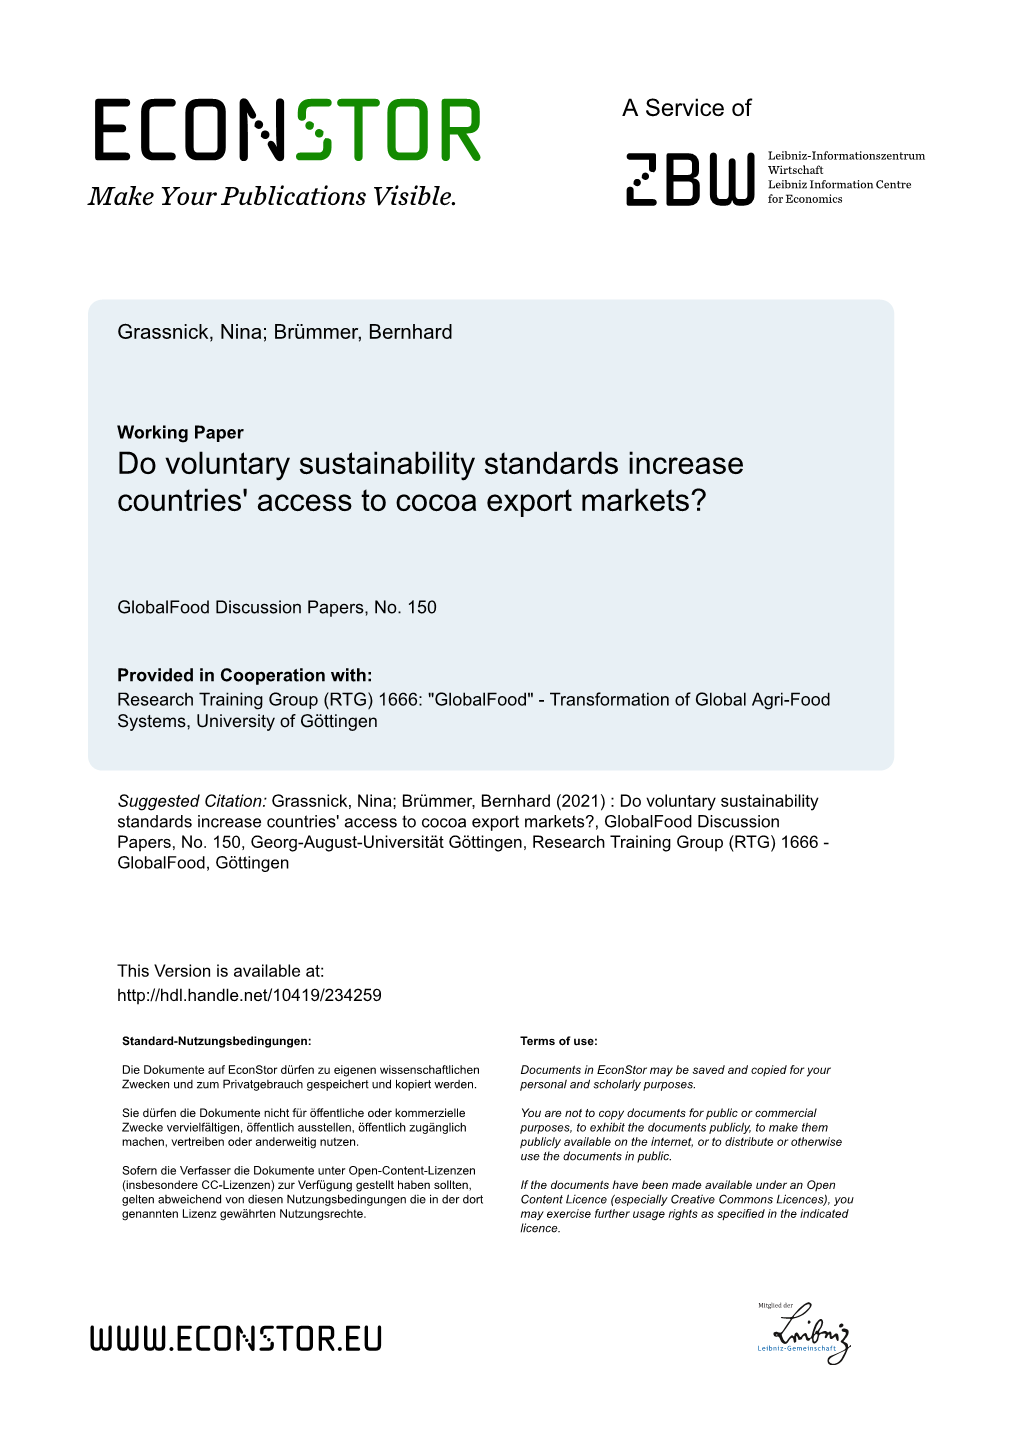 Do Voluntary Sustainability Standards Increase Countries' Access to Cocoa Export Markets?